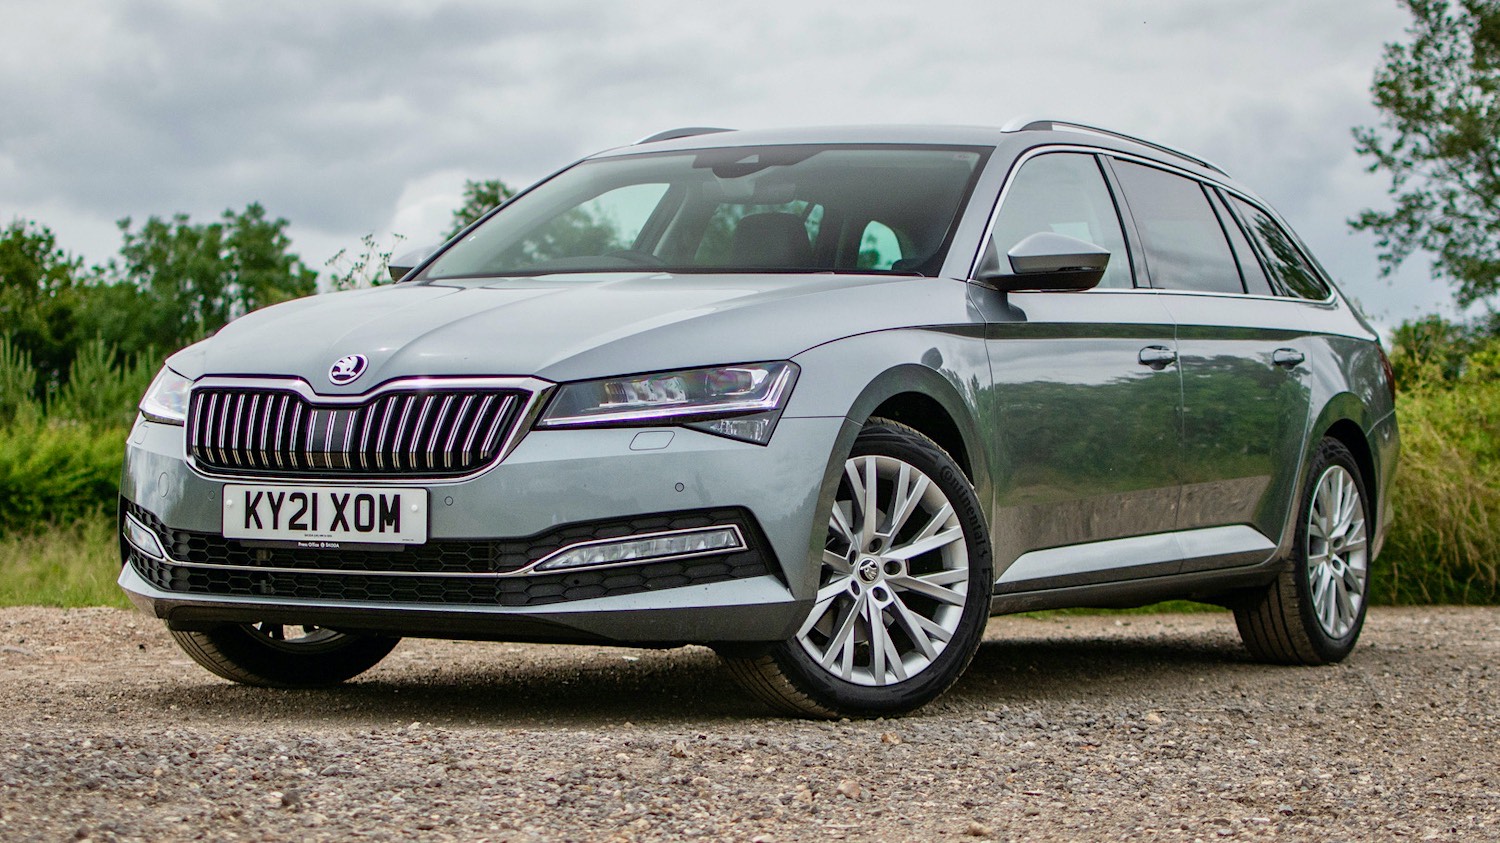 The Škoda Superb TDI Estate – what more could you need?